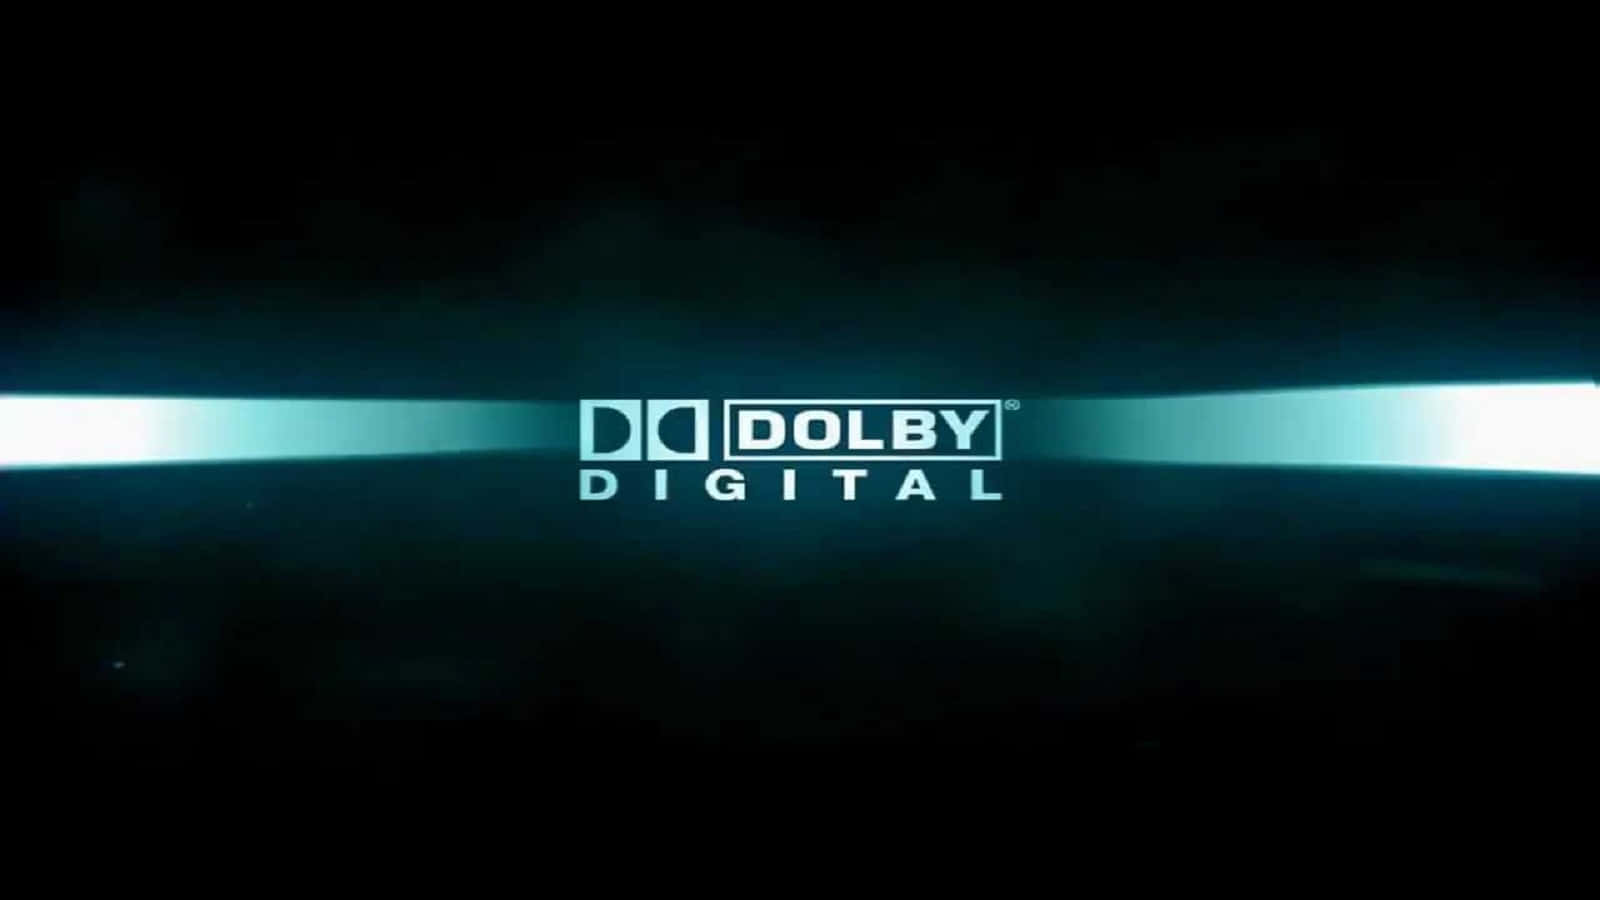 Dolby Digital Brings High Quality Audio and Video to Your Home Wallpaper